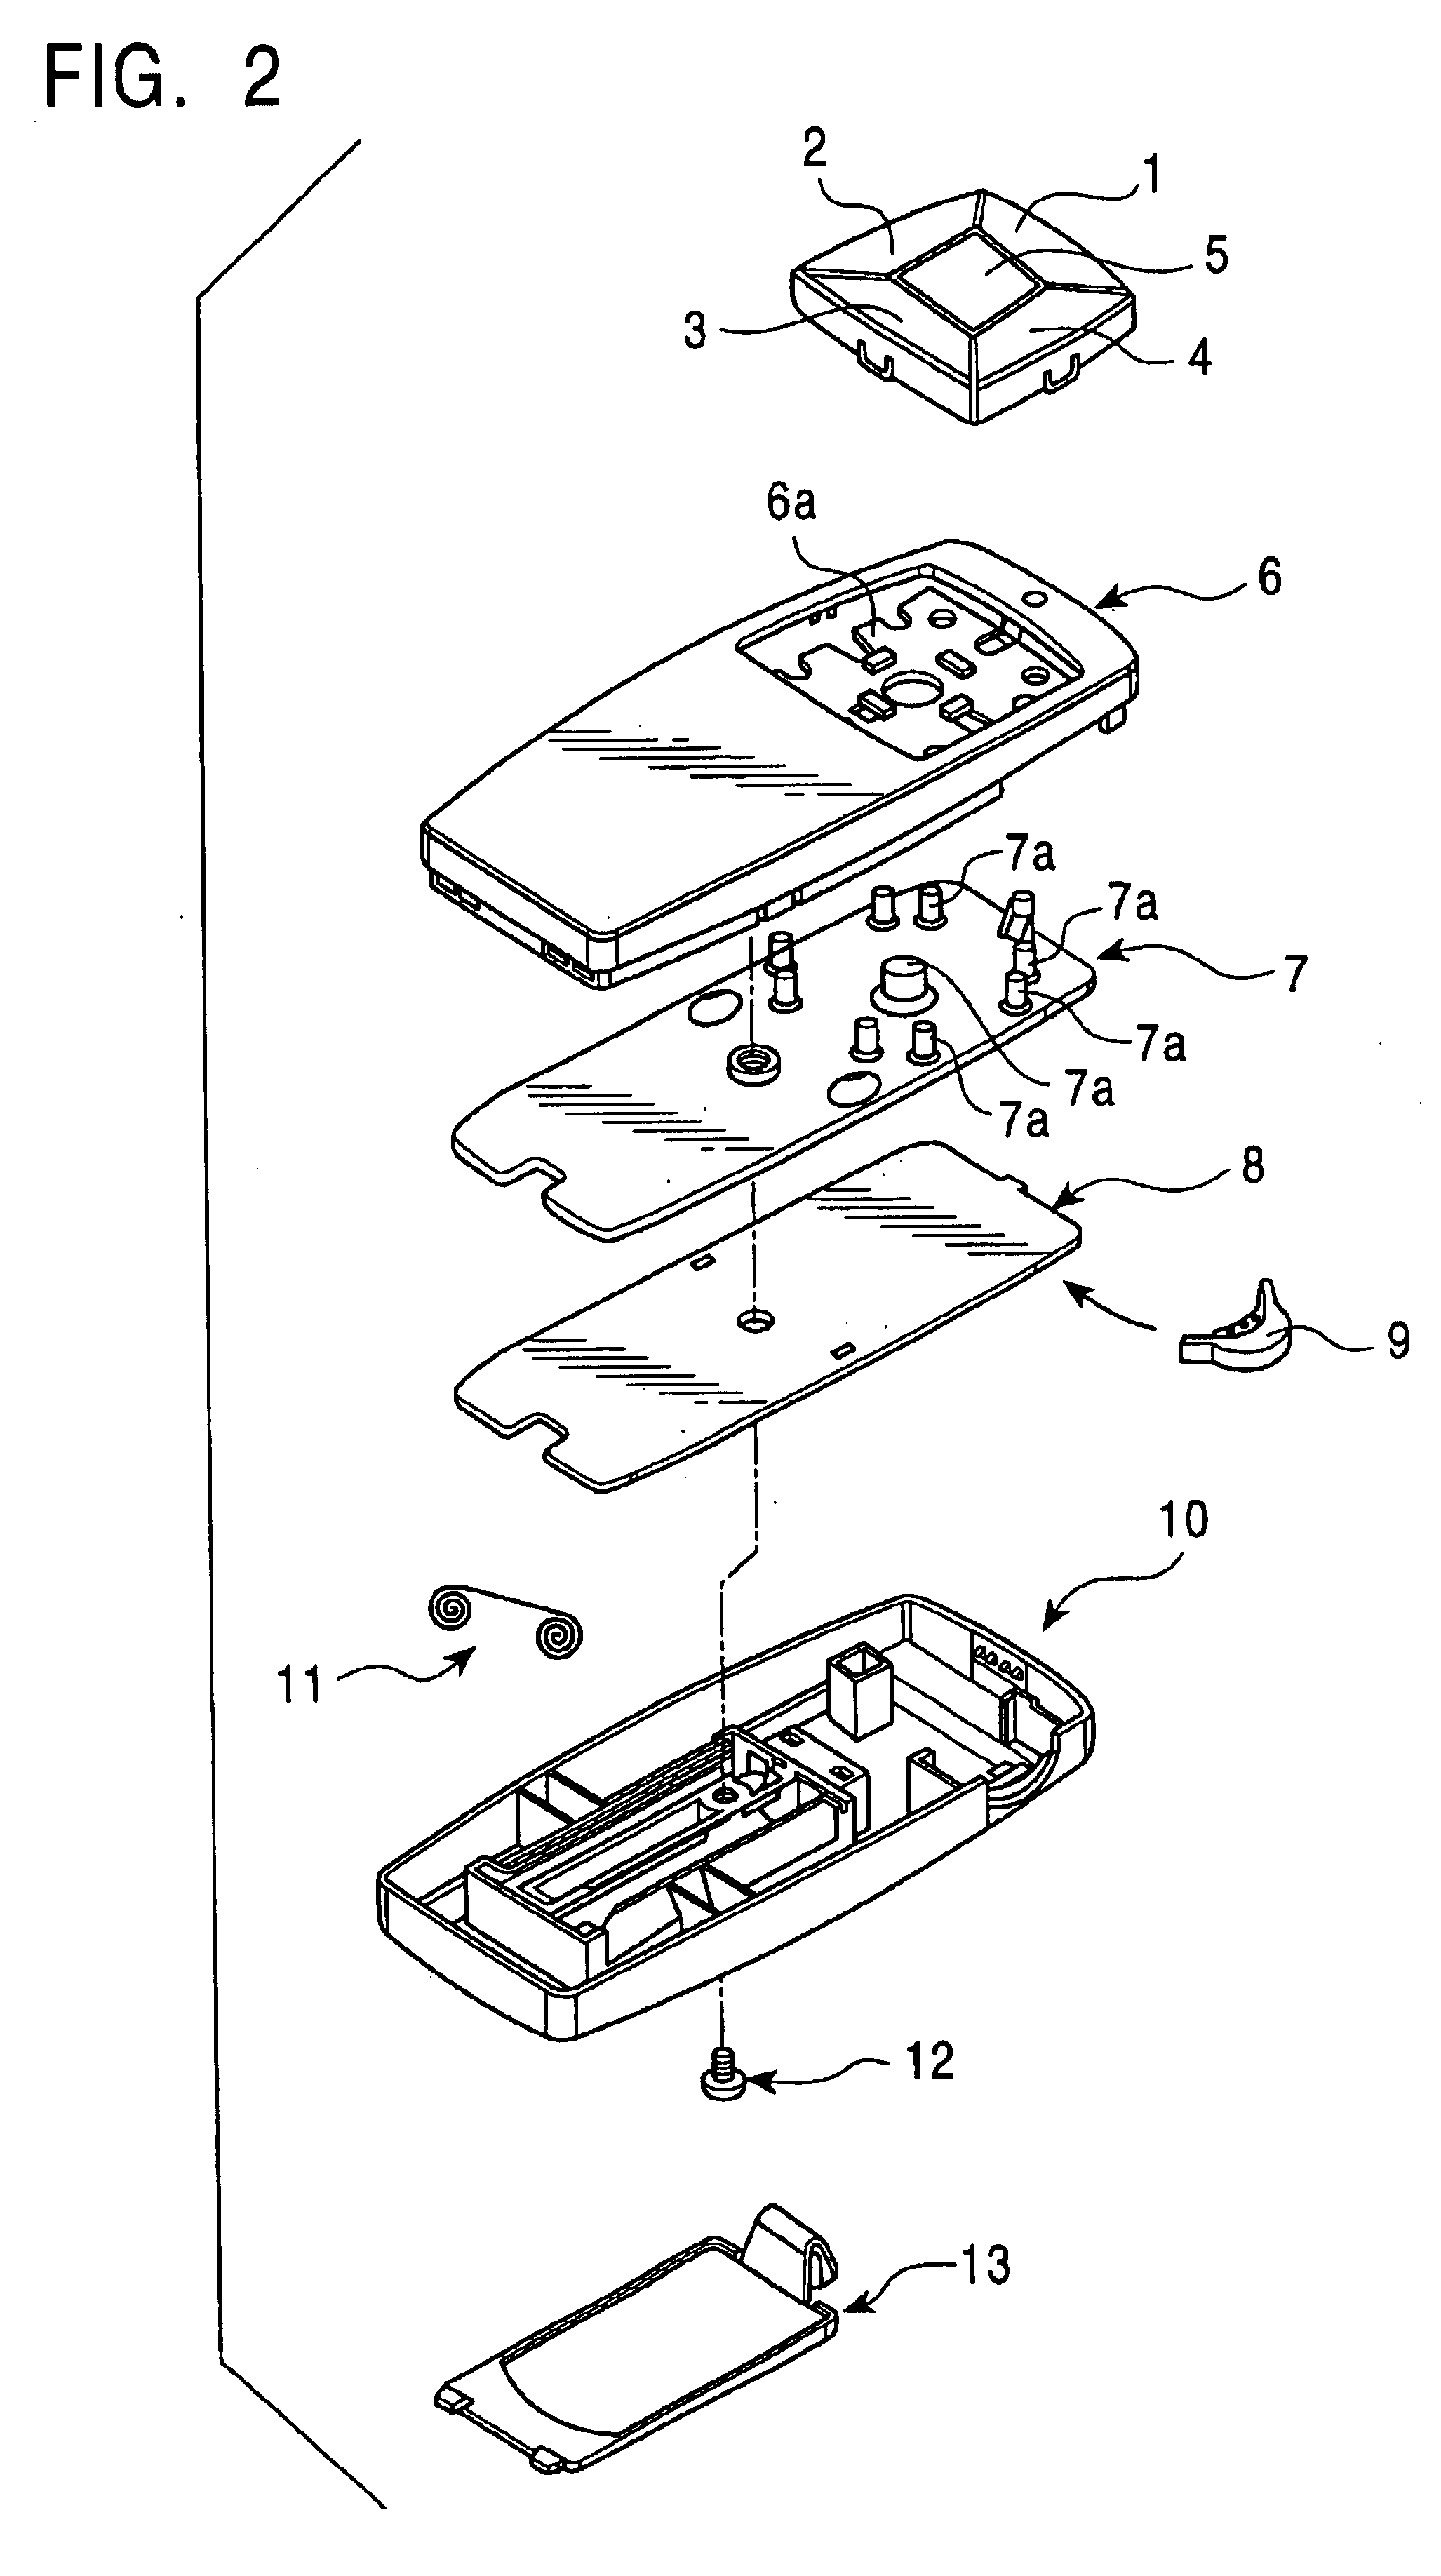 Switching device including stopper surface-mounted on printed circuit board